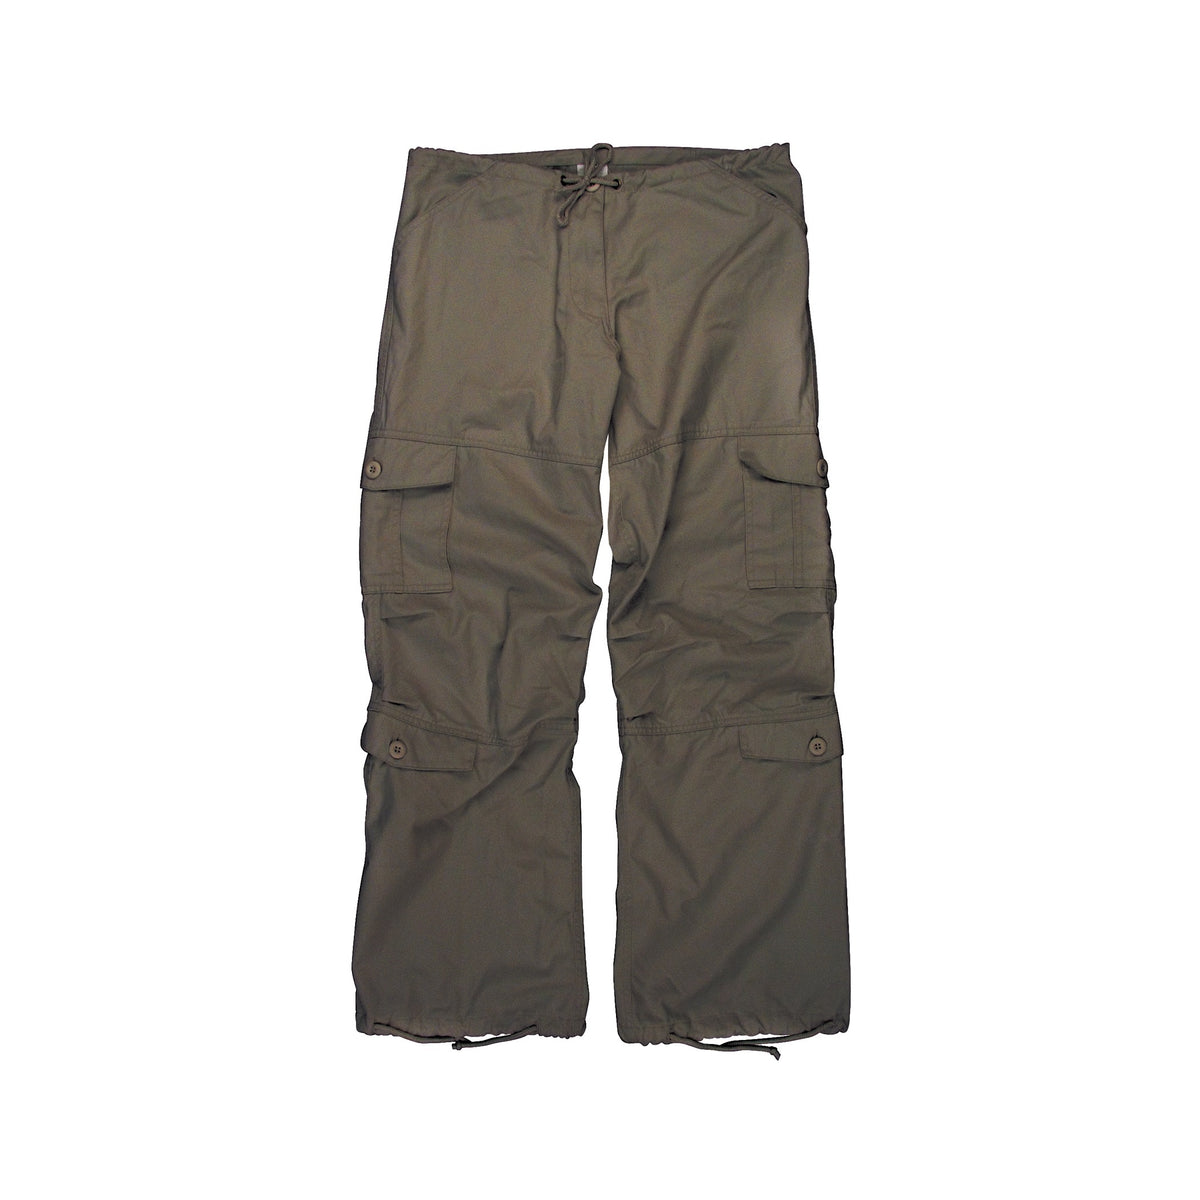 Rothco Women's Vintage Paratrooper Fatigue Pants Stone